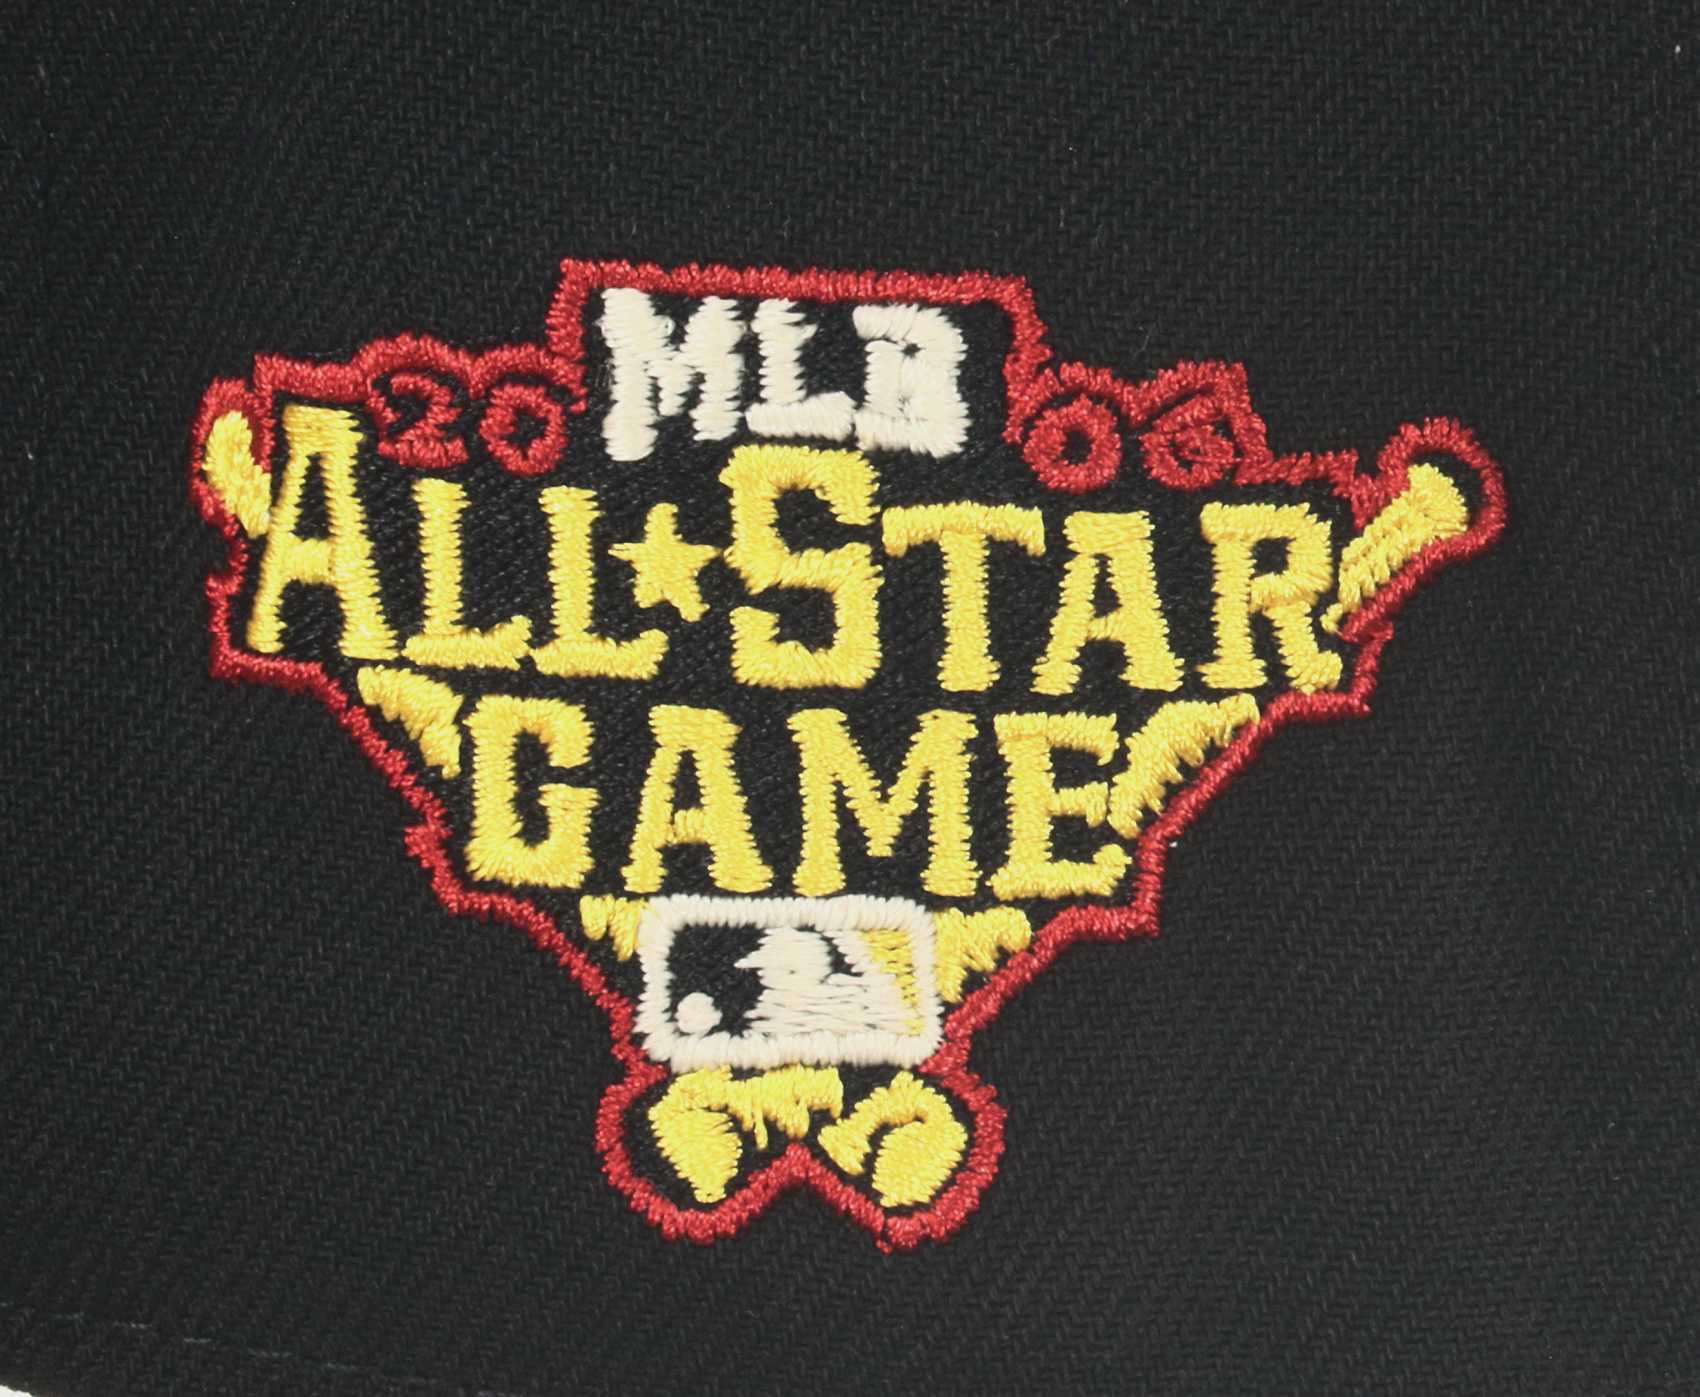 Pittsburgh Pirates Black Base Side Patch All-Star Game 59Fifty Basecap New Era